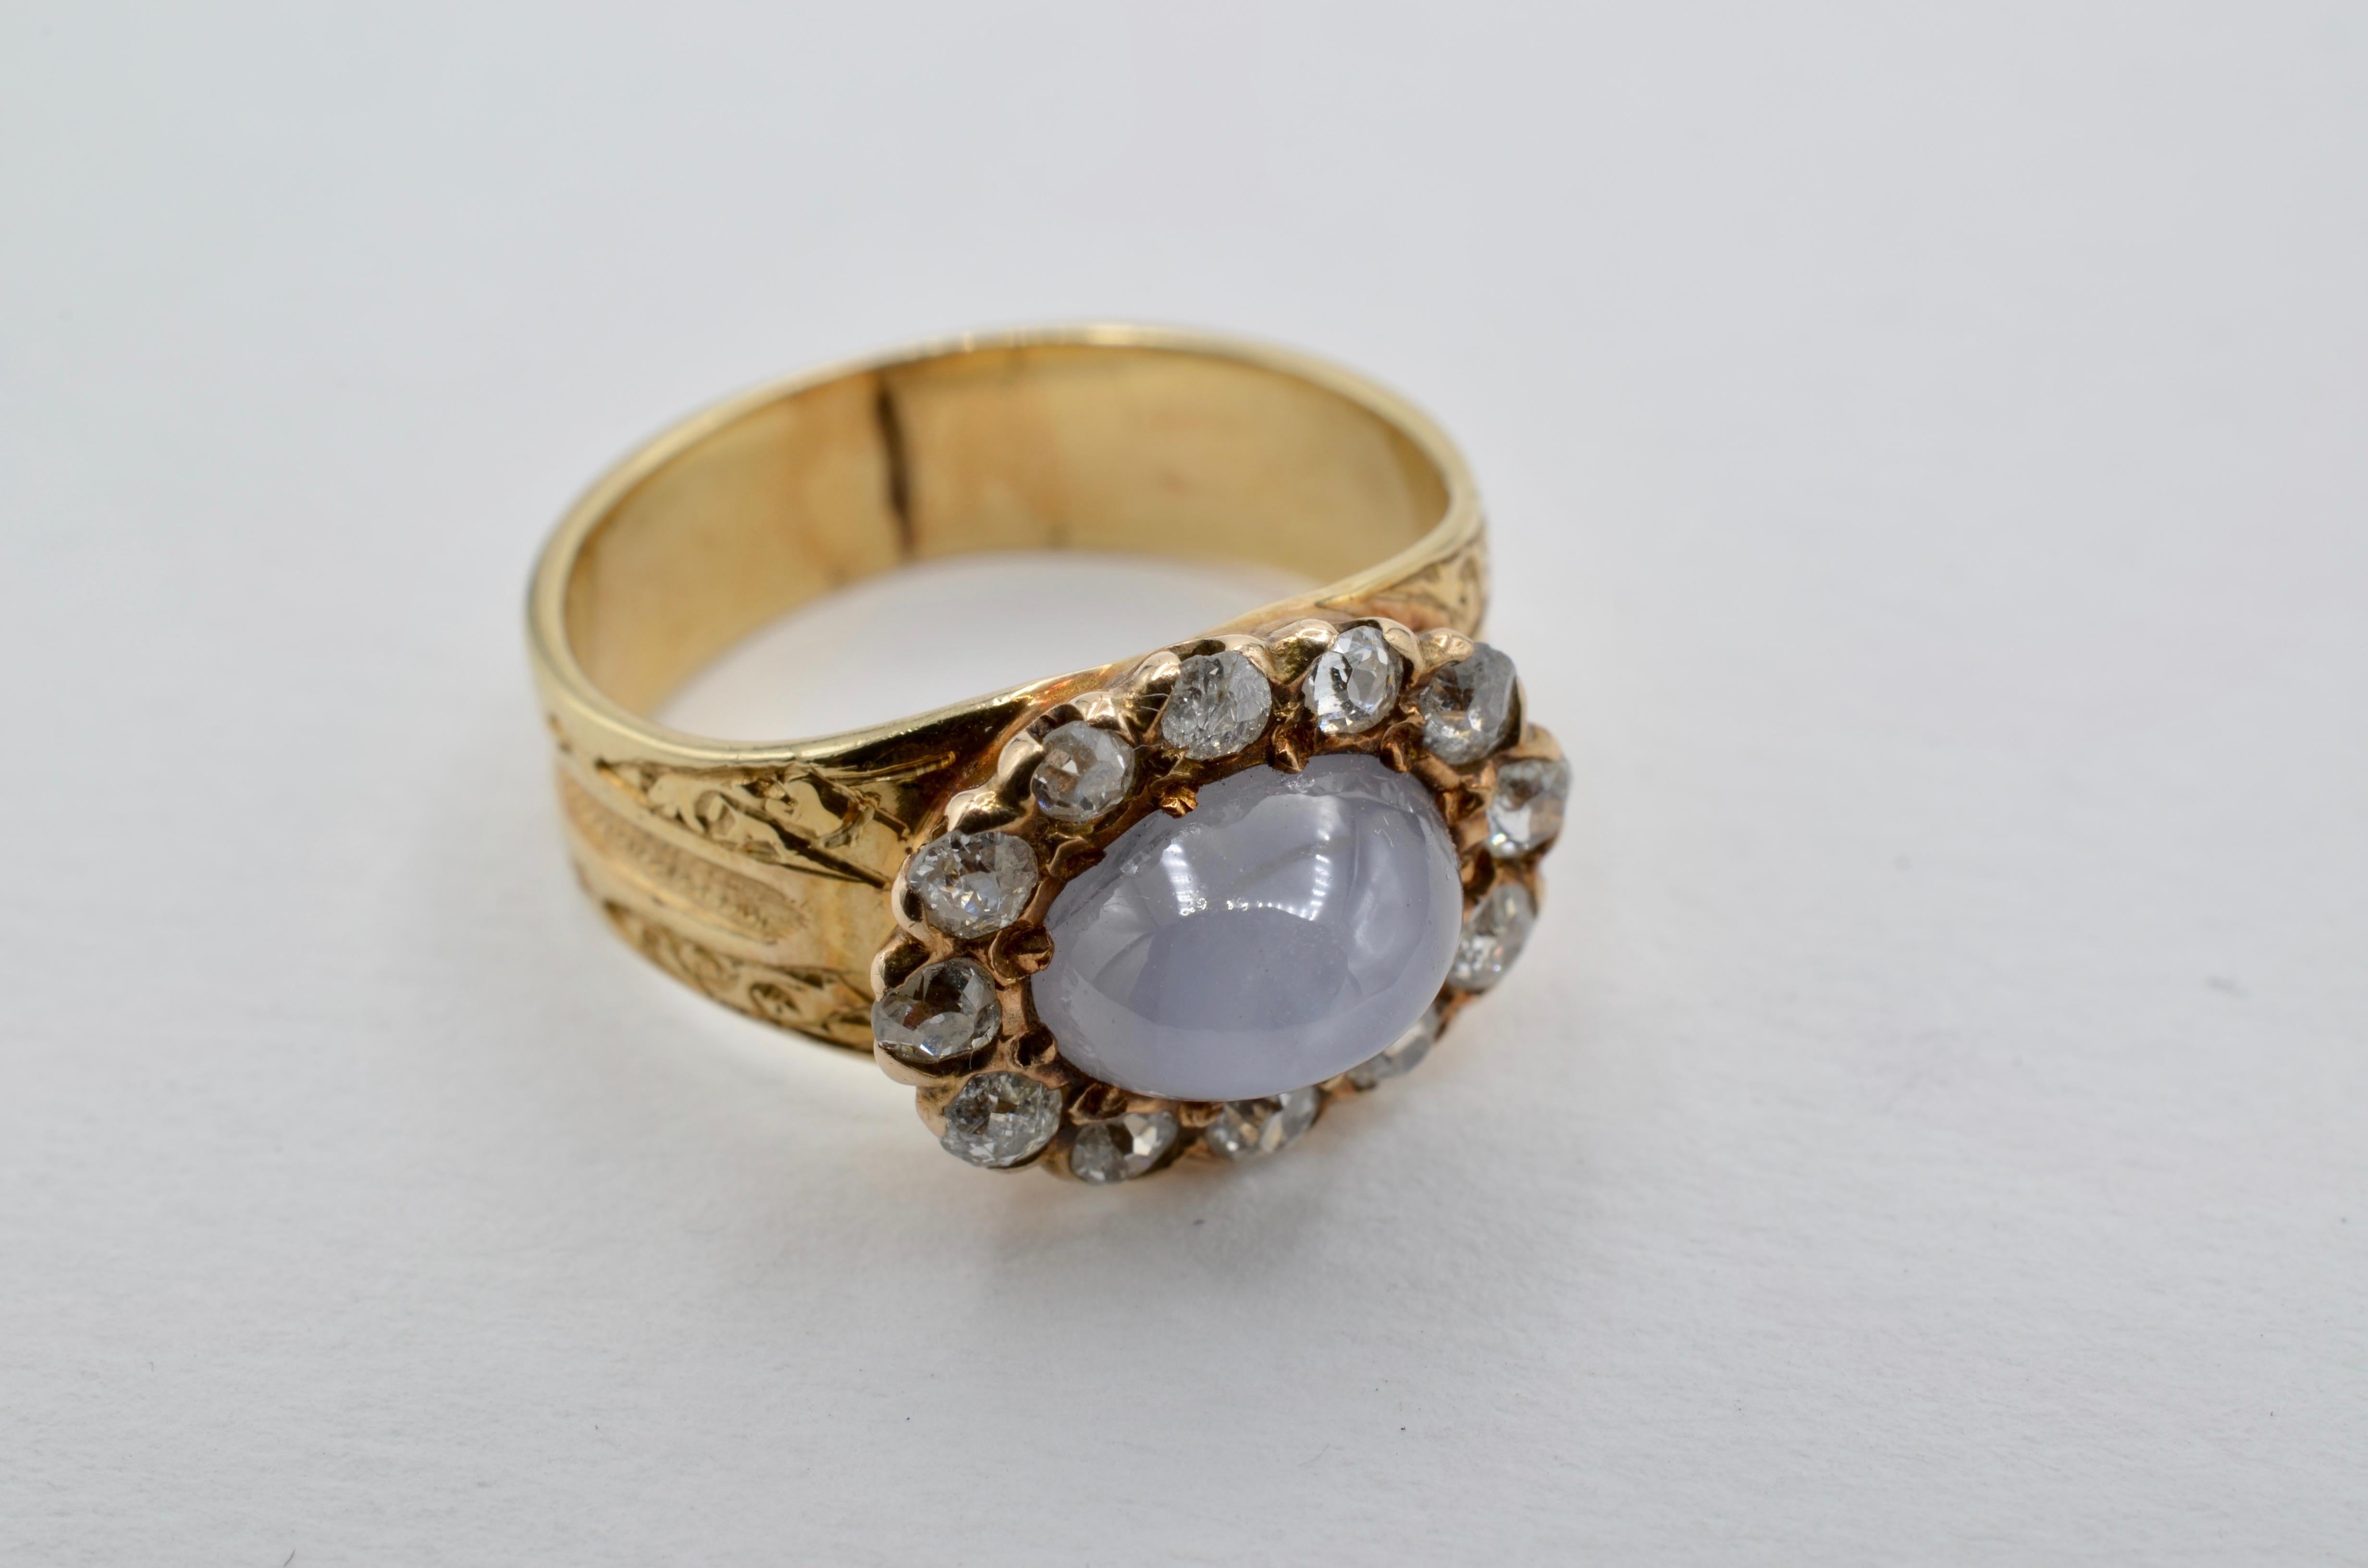 This stunning blue star sapphire ( aprox. 1 1/4 ct) ring is surrounded by a halo of old mine cut diamonds ( total weight aprox. 0.60 ct.) The Late Victorian period was a prolific time in history for feminine and striking pieces such as this ring. A